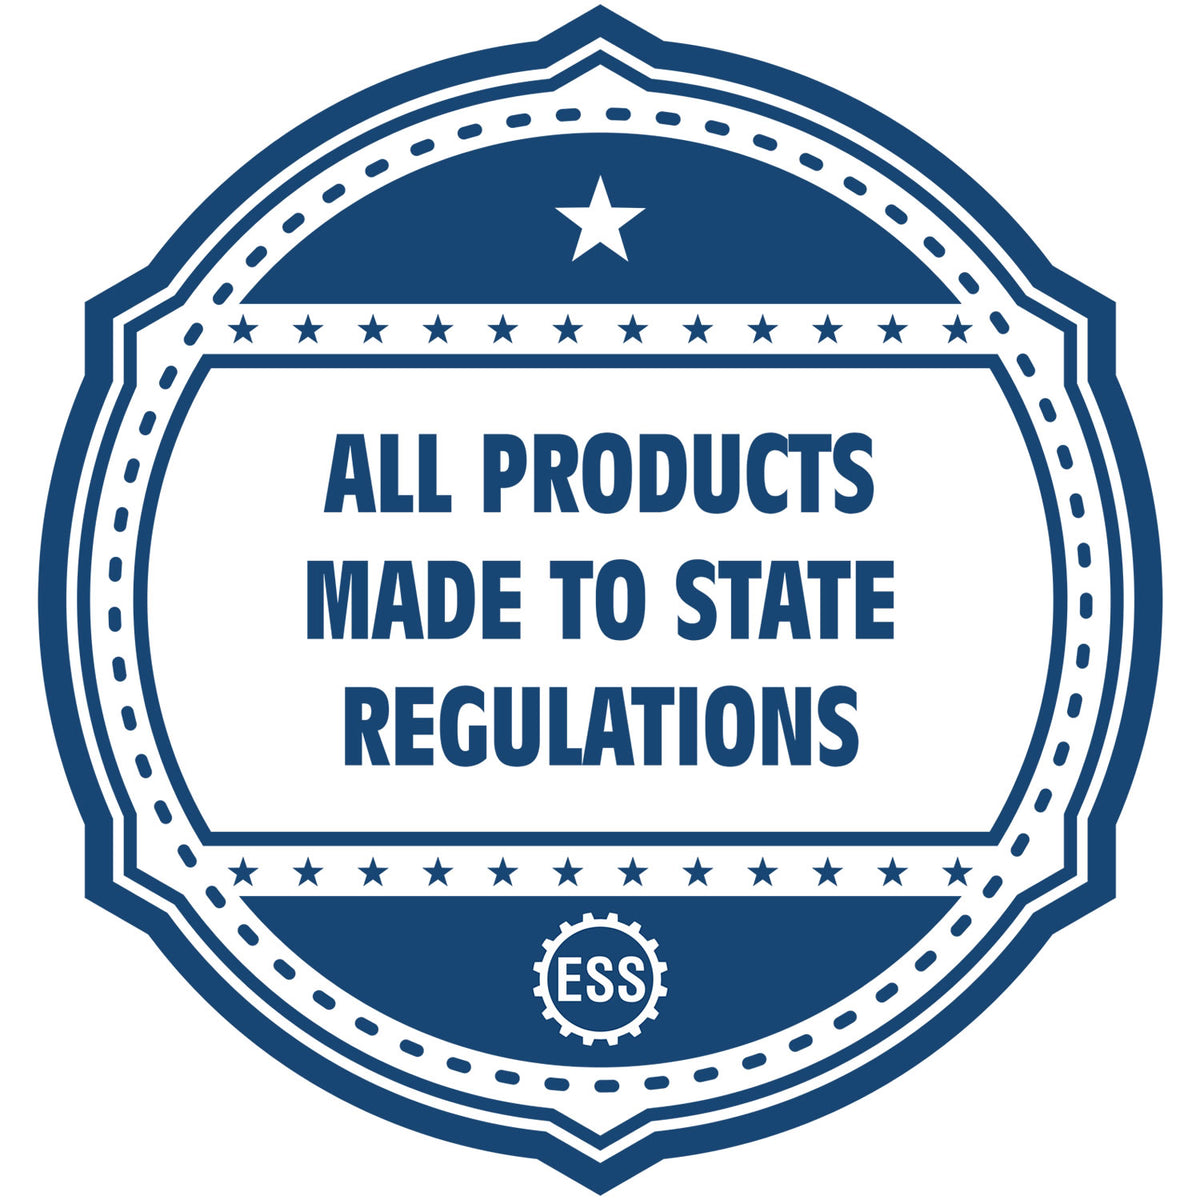 An icon or badge element for the Self-Inking Illinois Landscape Architect Stamp showing that this product is made in compliance with state regulations.